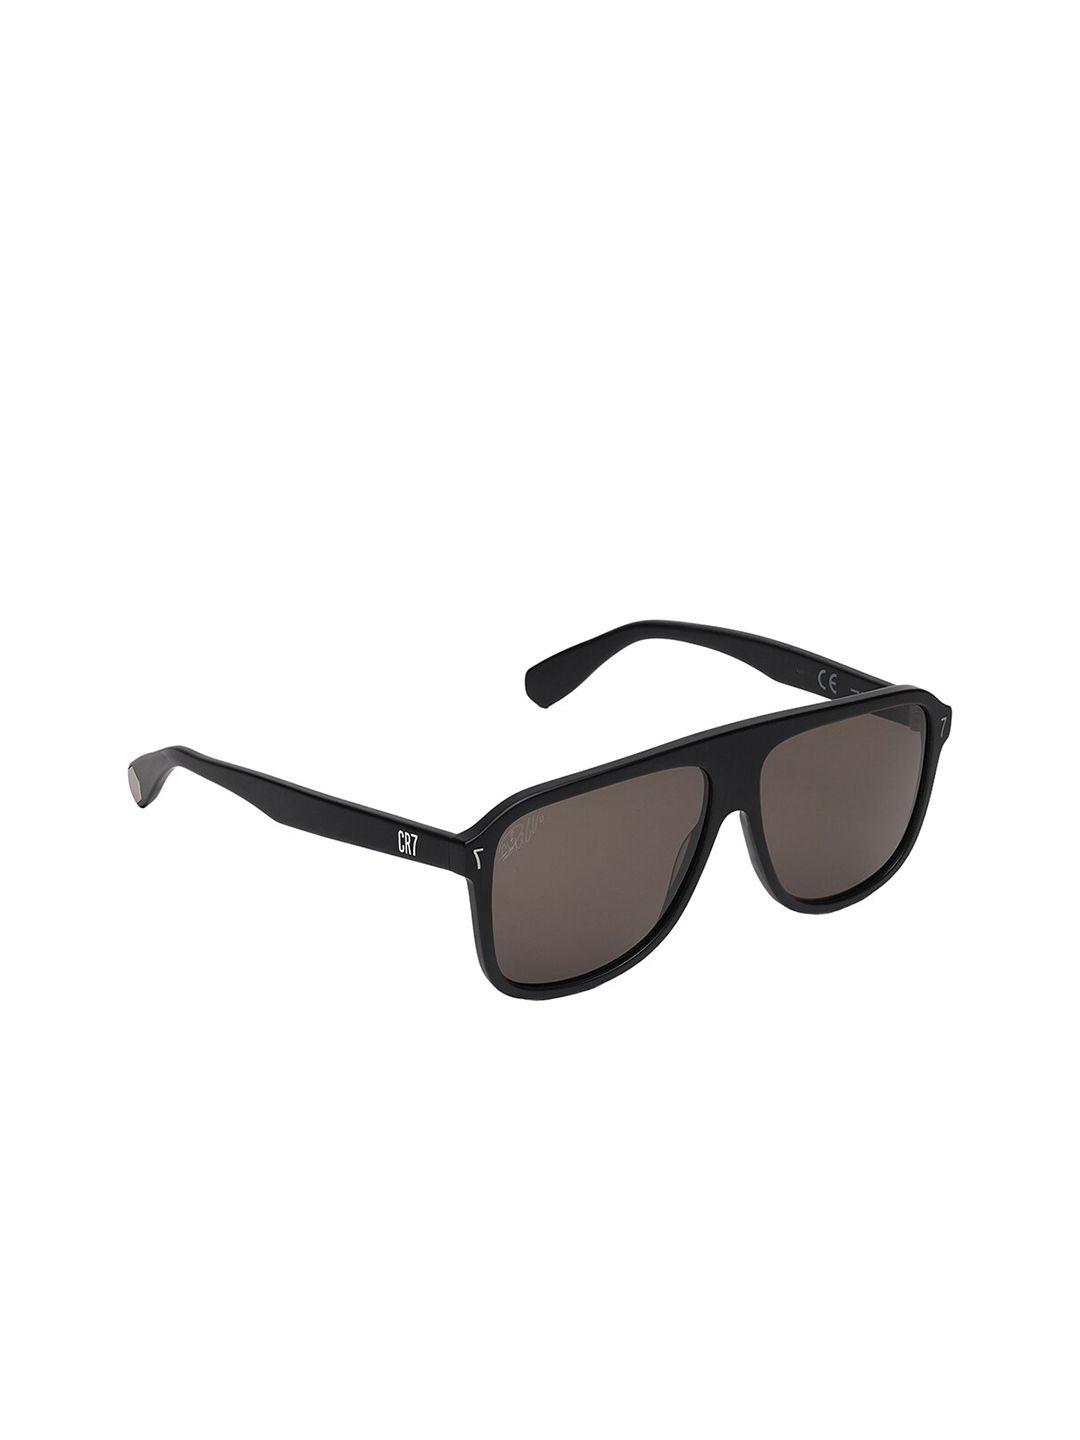 cr7 men square sunglasses with uv protected lens